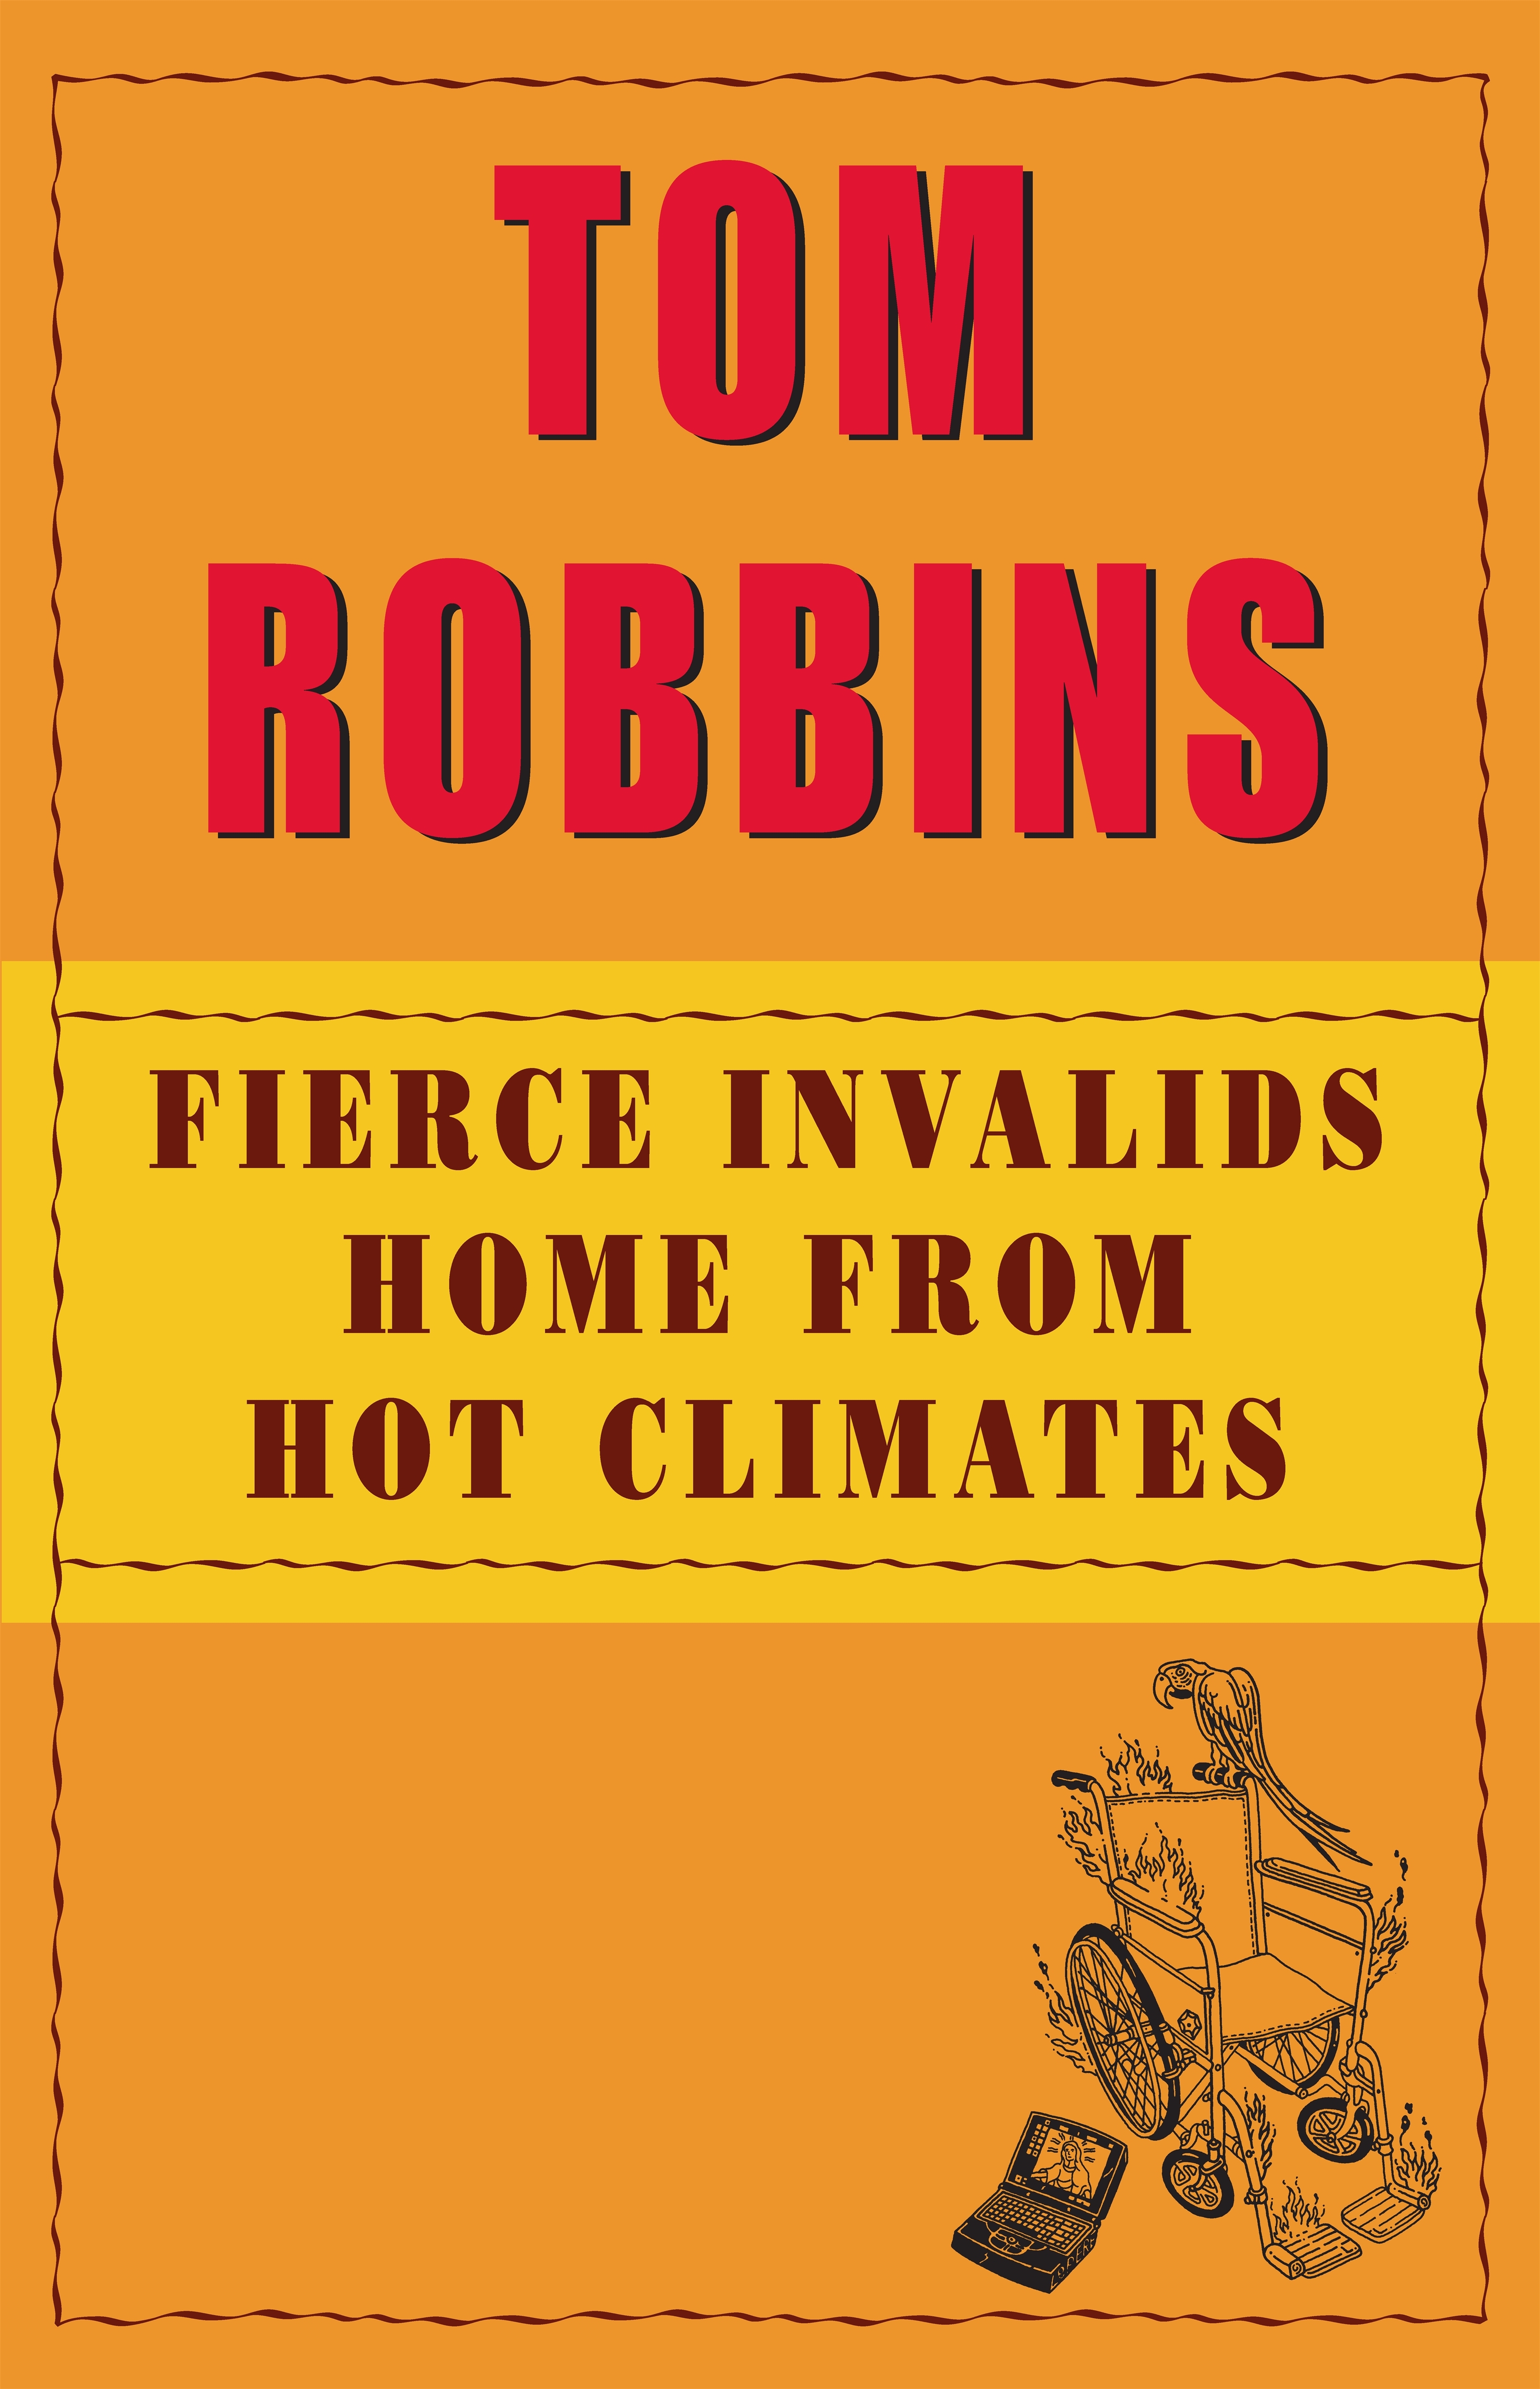 Fierce Invalids Home From Hot Climates by Tom Robbins Penguin Books